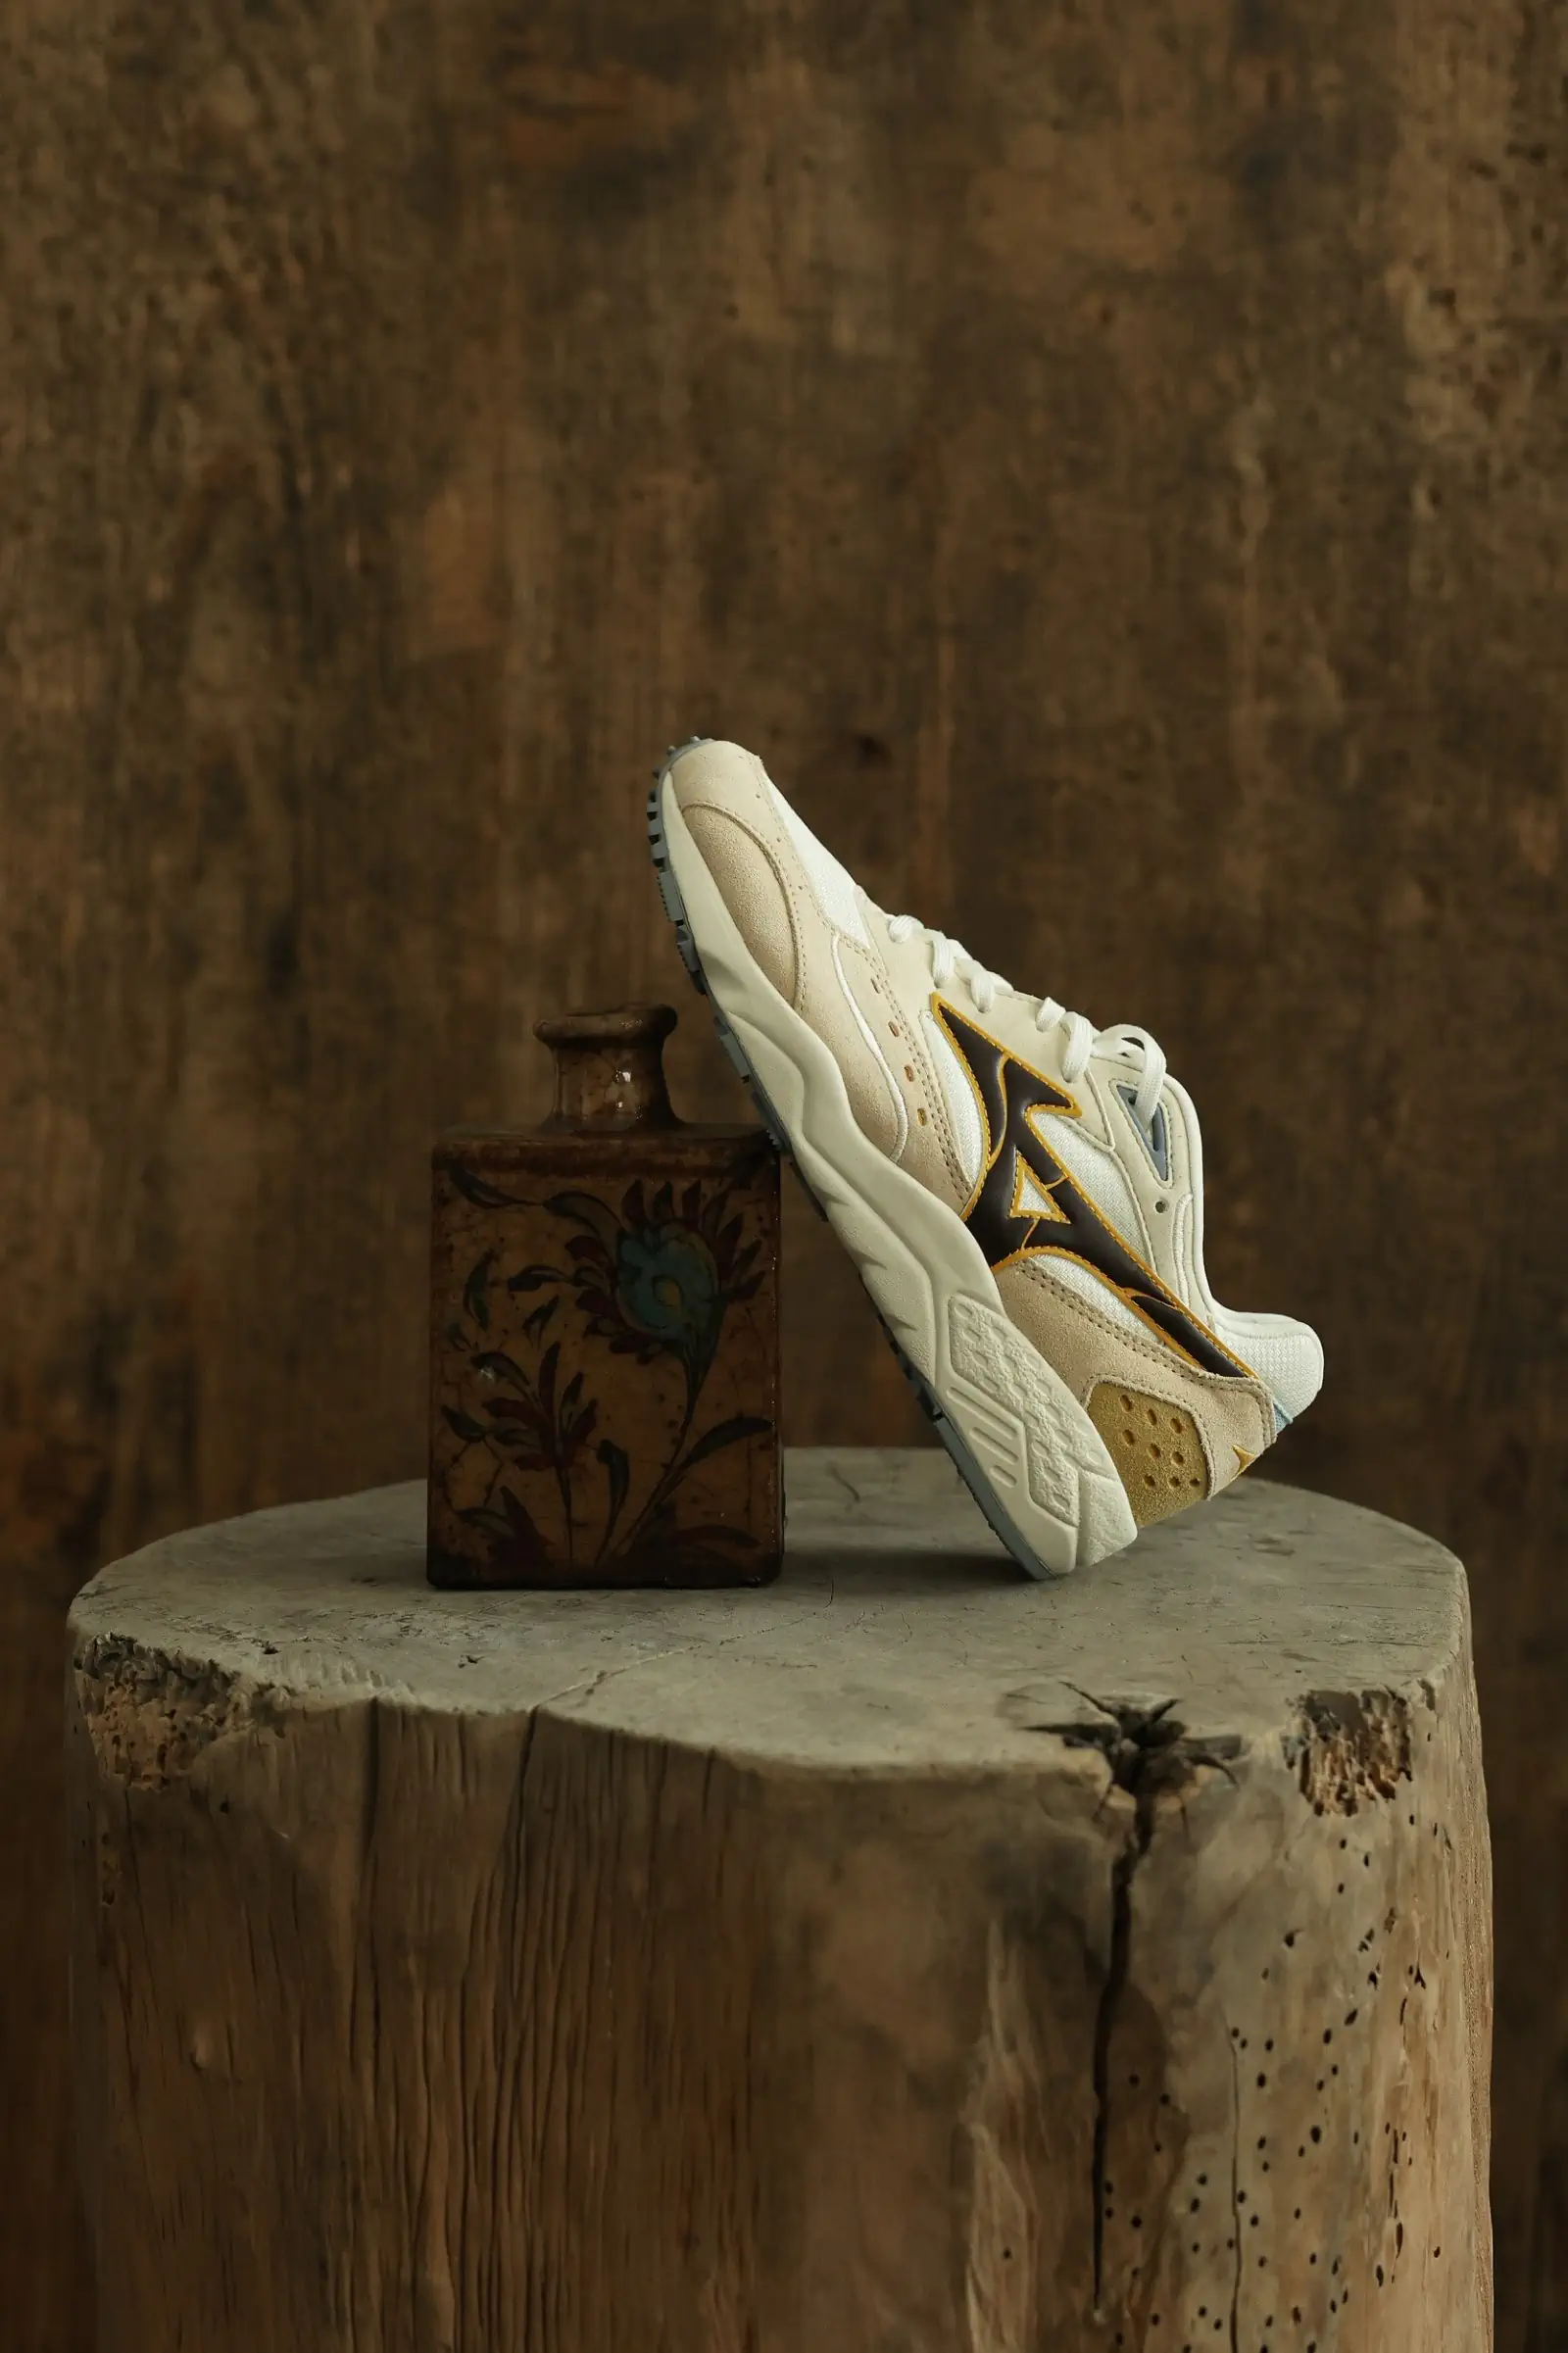 Mizuno Pack Kizuna: A Tribute to Tradition and Aesthetic Perfection in Footwear